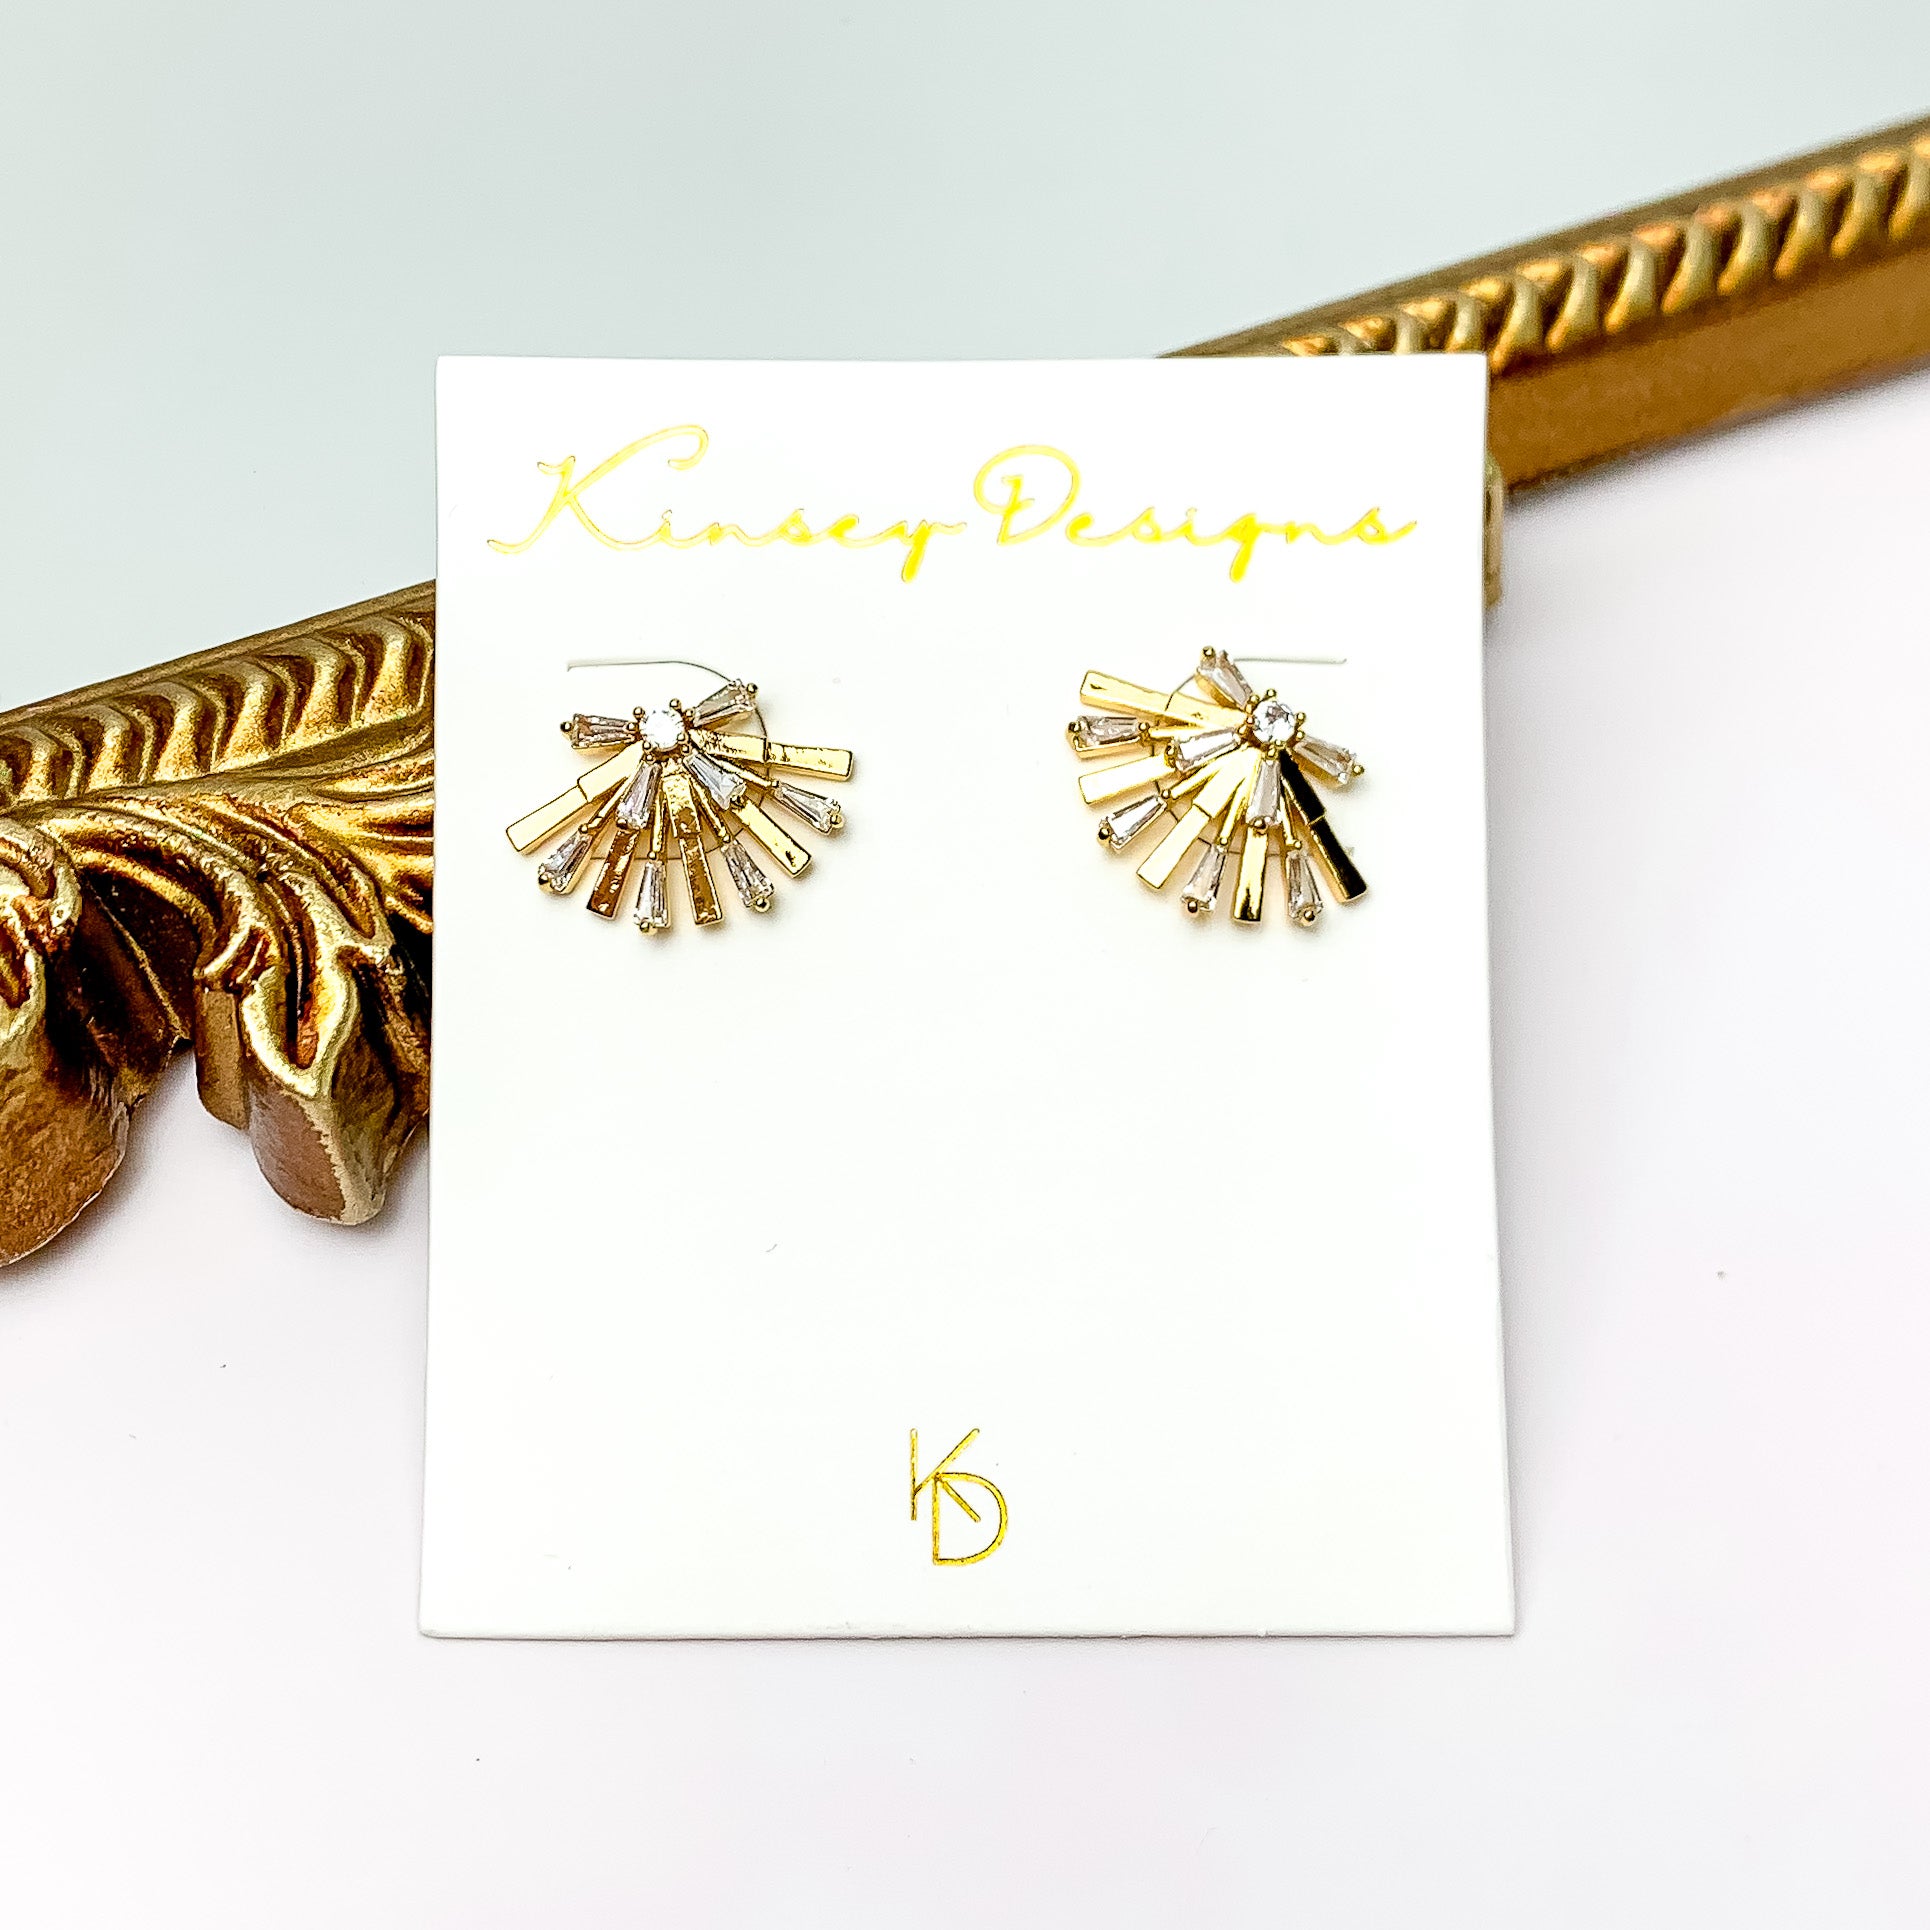 Kinsey Designs | Rae Post Earrings with CZ Crystals - Giddy Up Glamour Boutique